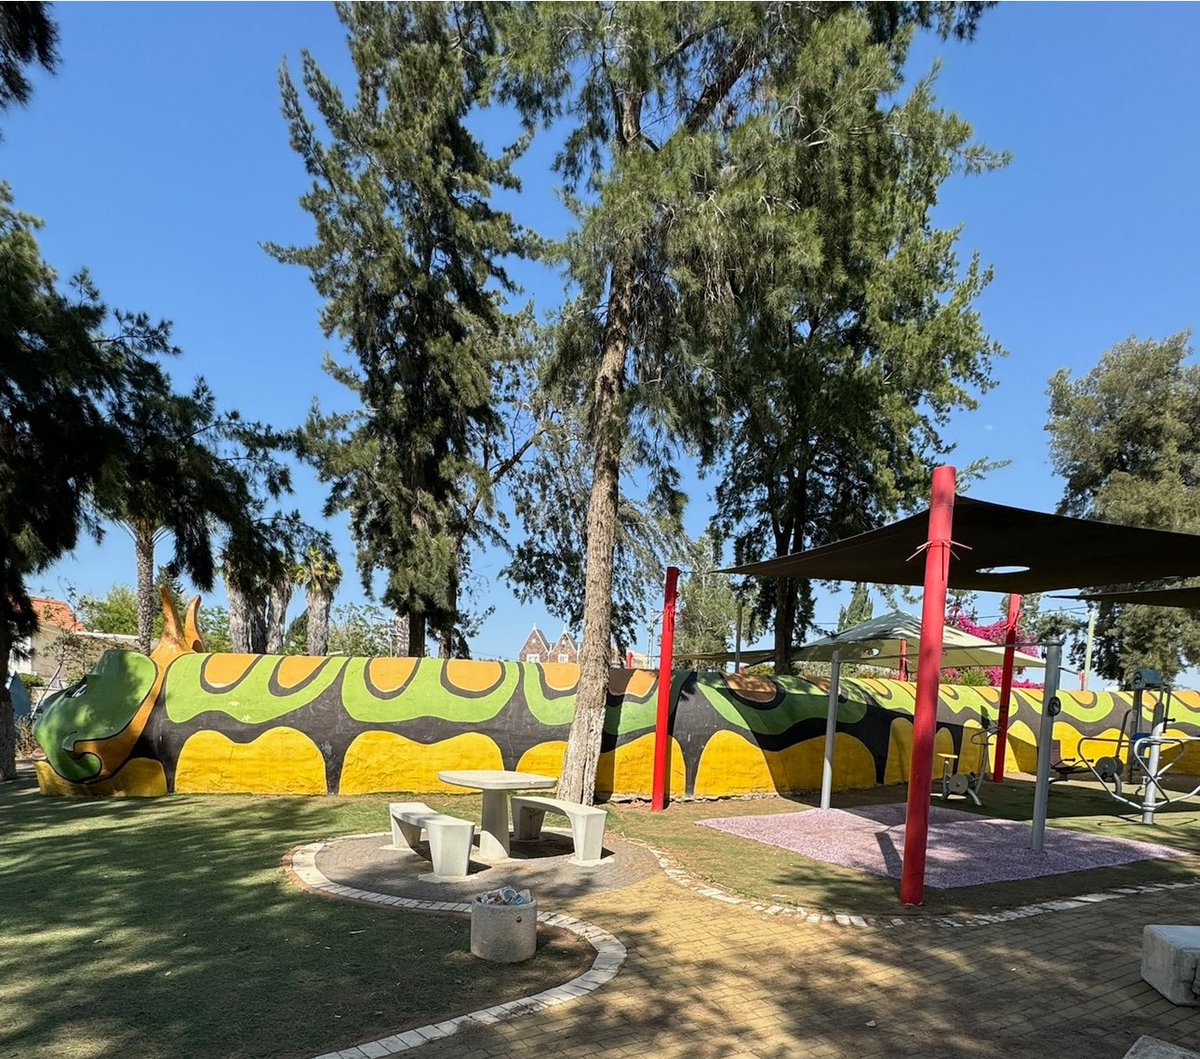 One of the most shocking, shameful, and disturbing parts about Israel is how they need bomb shelters EVERYWHERE. In almost every building, in parking lots, in children’s playgrounds. No other country on the planet lives this way. No other airline needs a missile defense system.